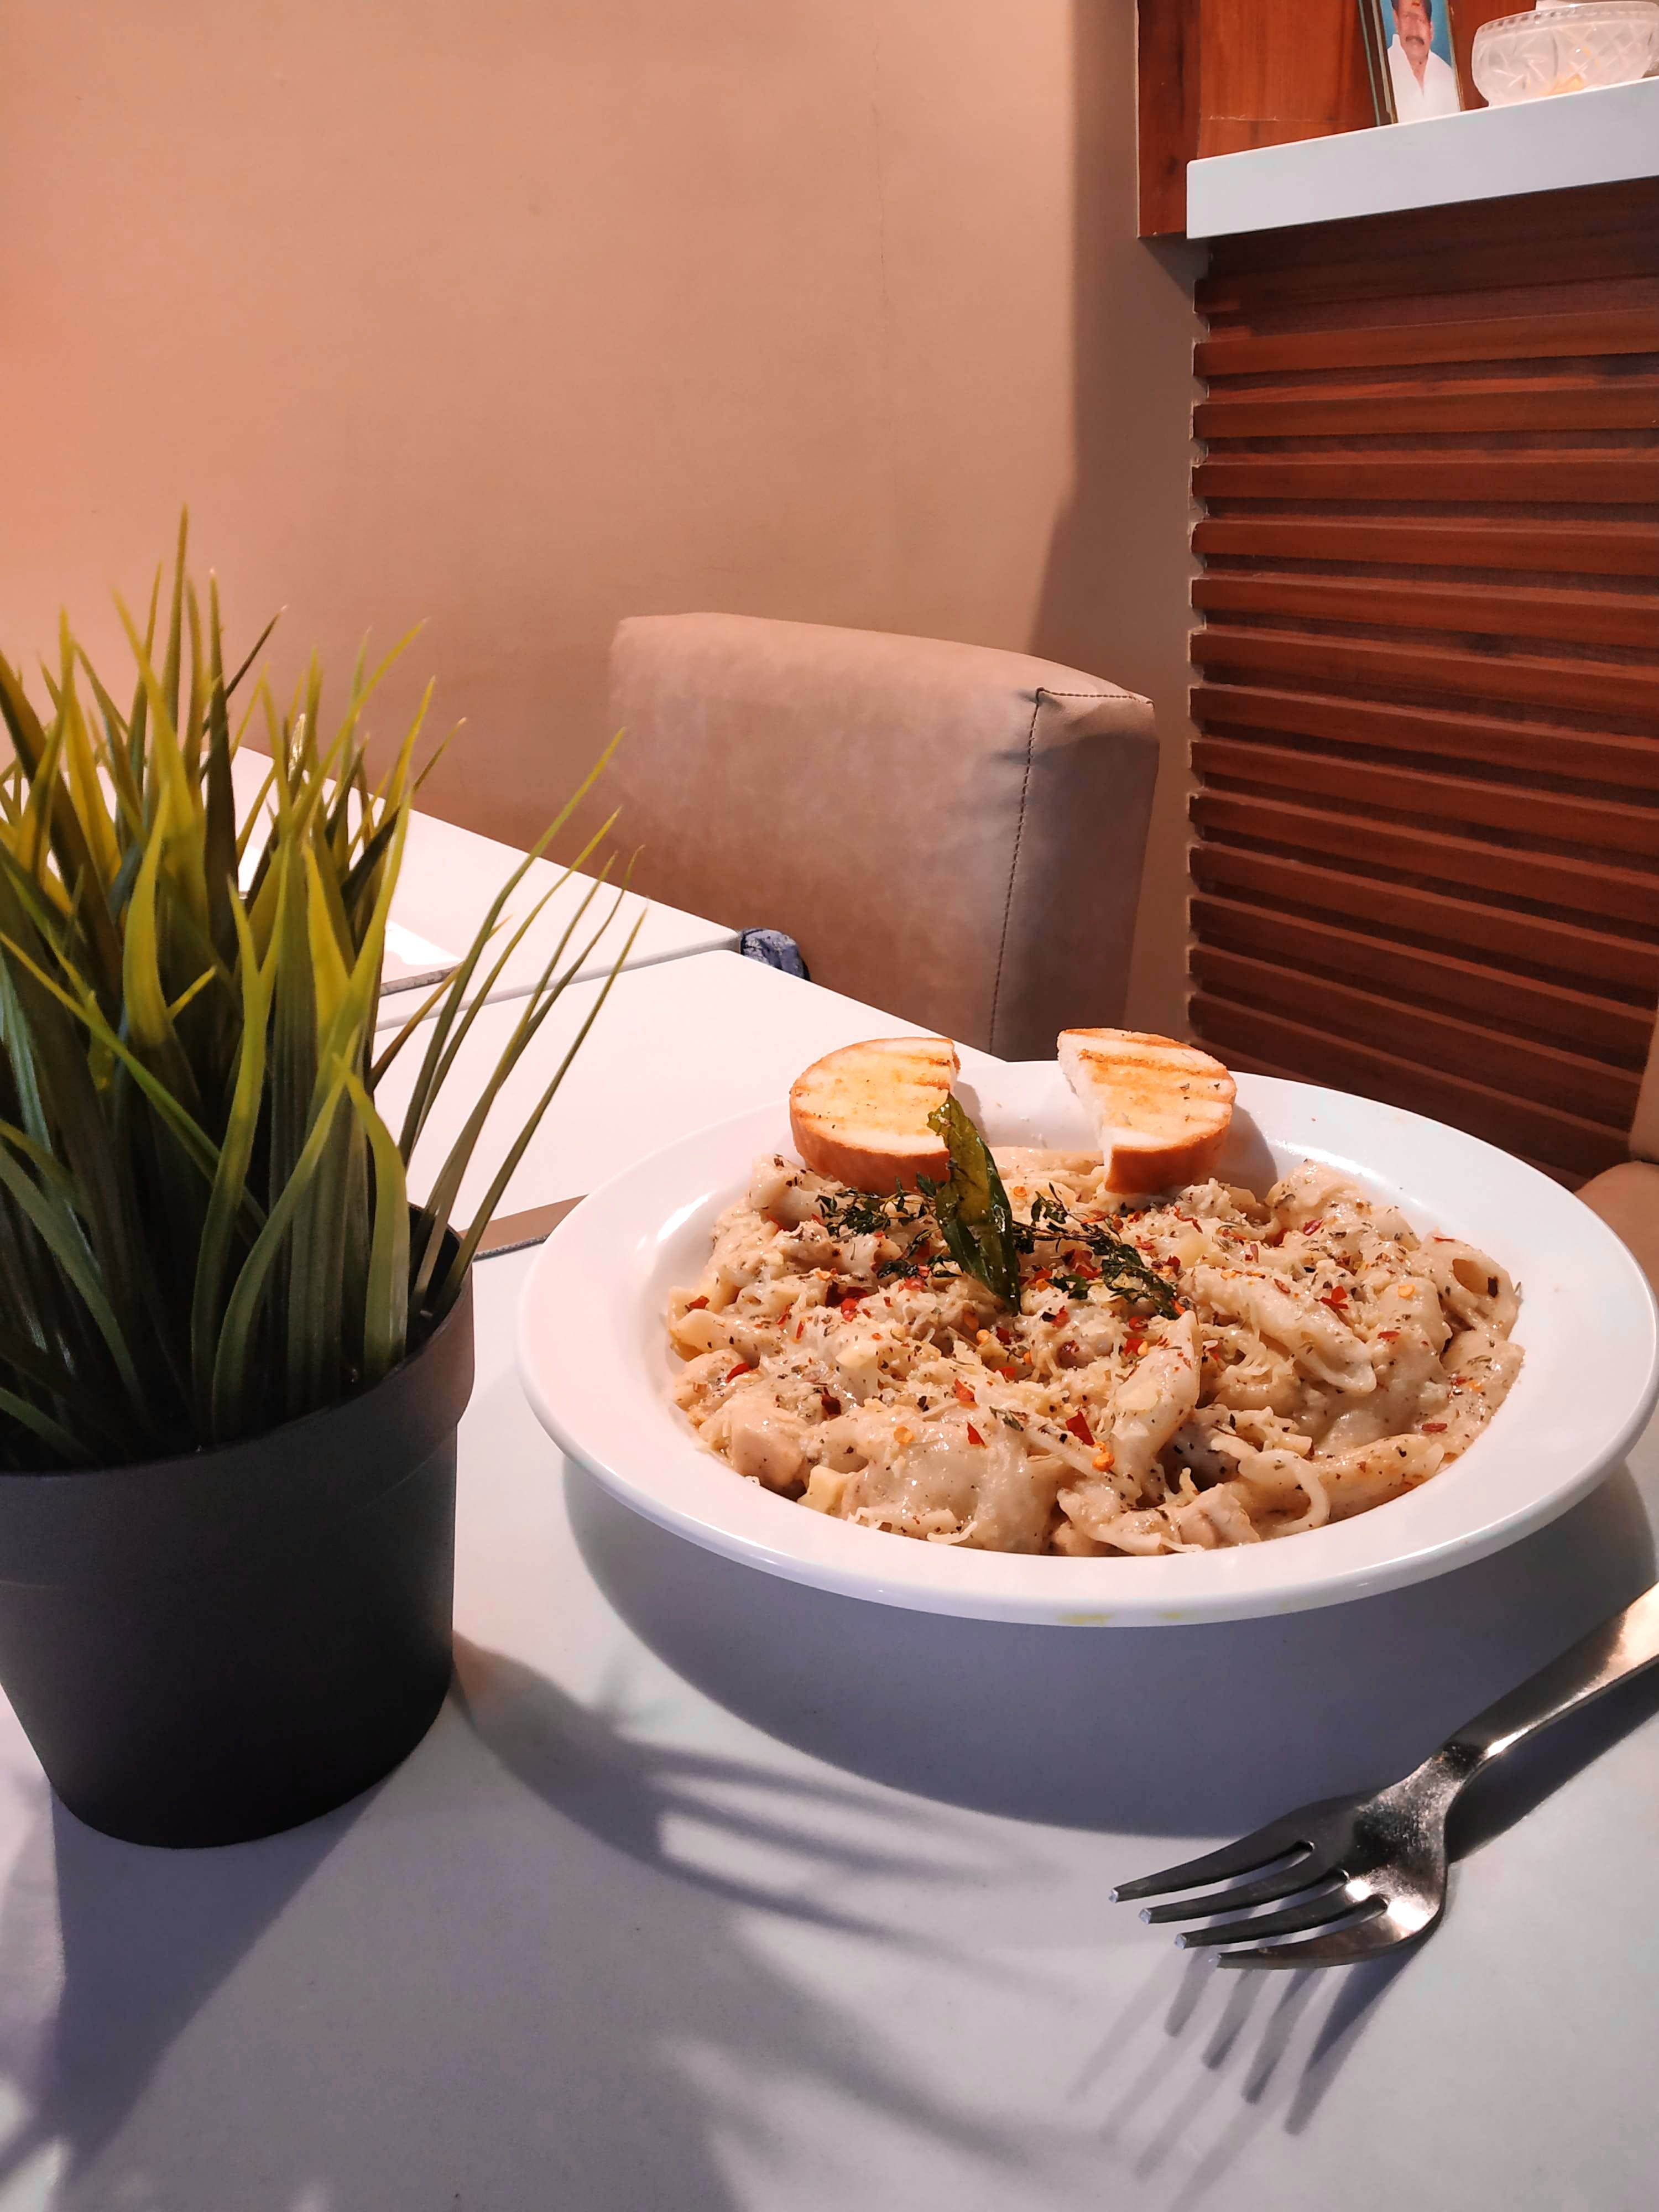 Food,Dish,Cuisine,Risotto,Ingredient,Rice,Produce,Farro,Meal,Food grain